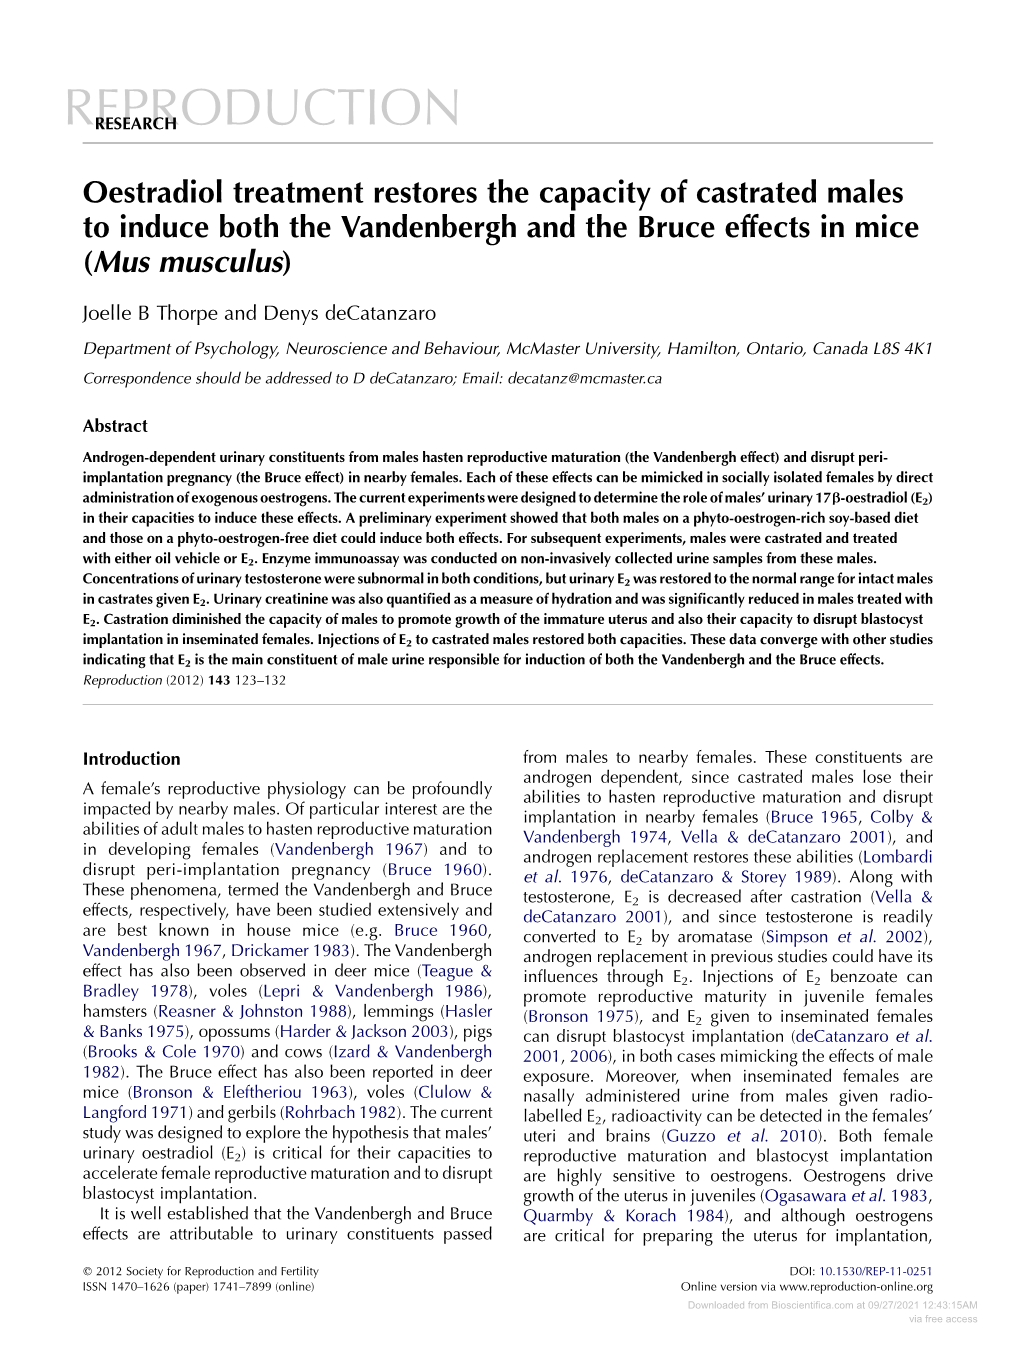 Effect of Gonadotrophins on the Ovarian Interstitial Tissue of The